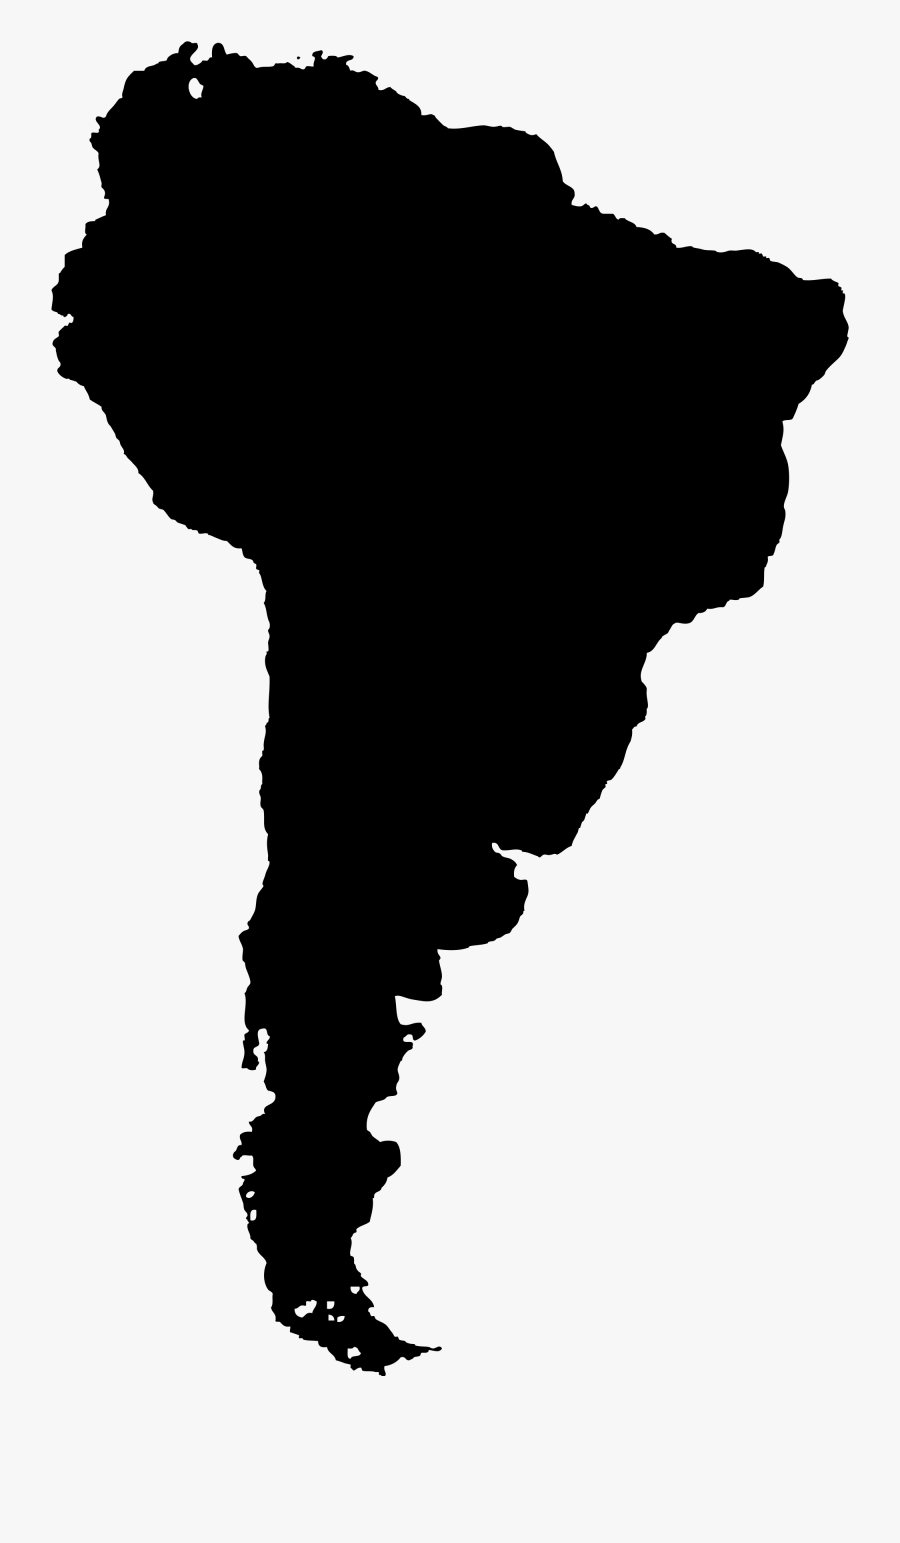 America Silhouette At Getdrawings - South America Map Silhouette, Transparent Clipart